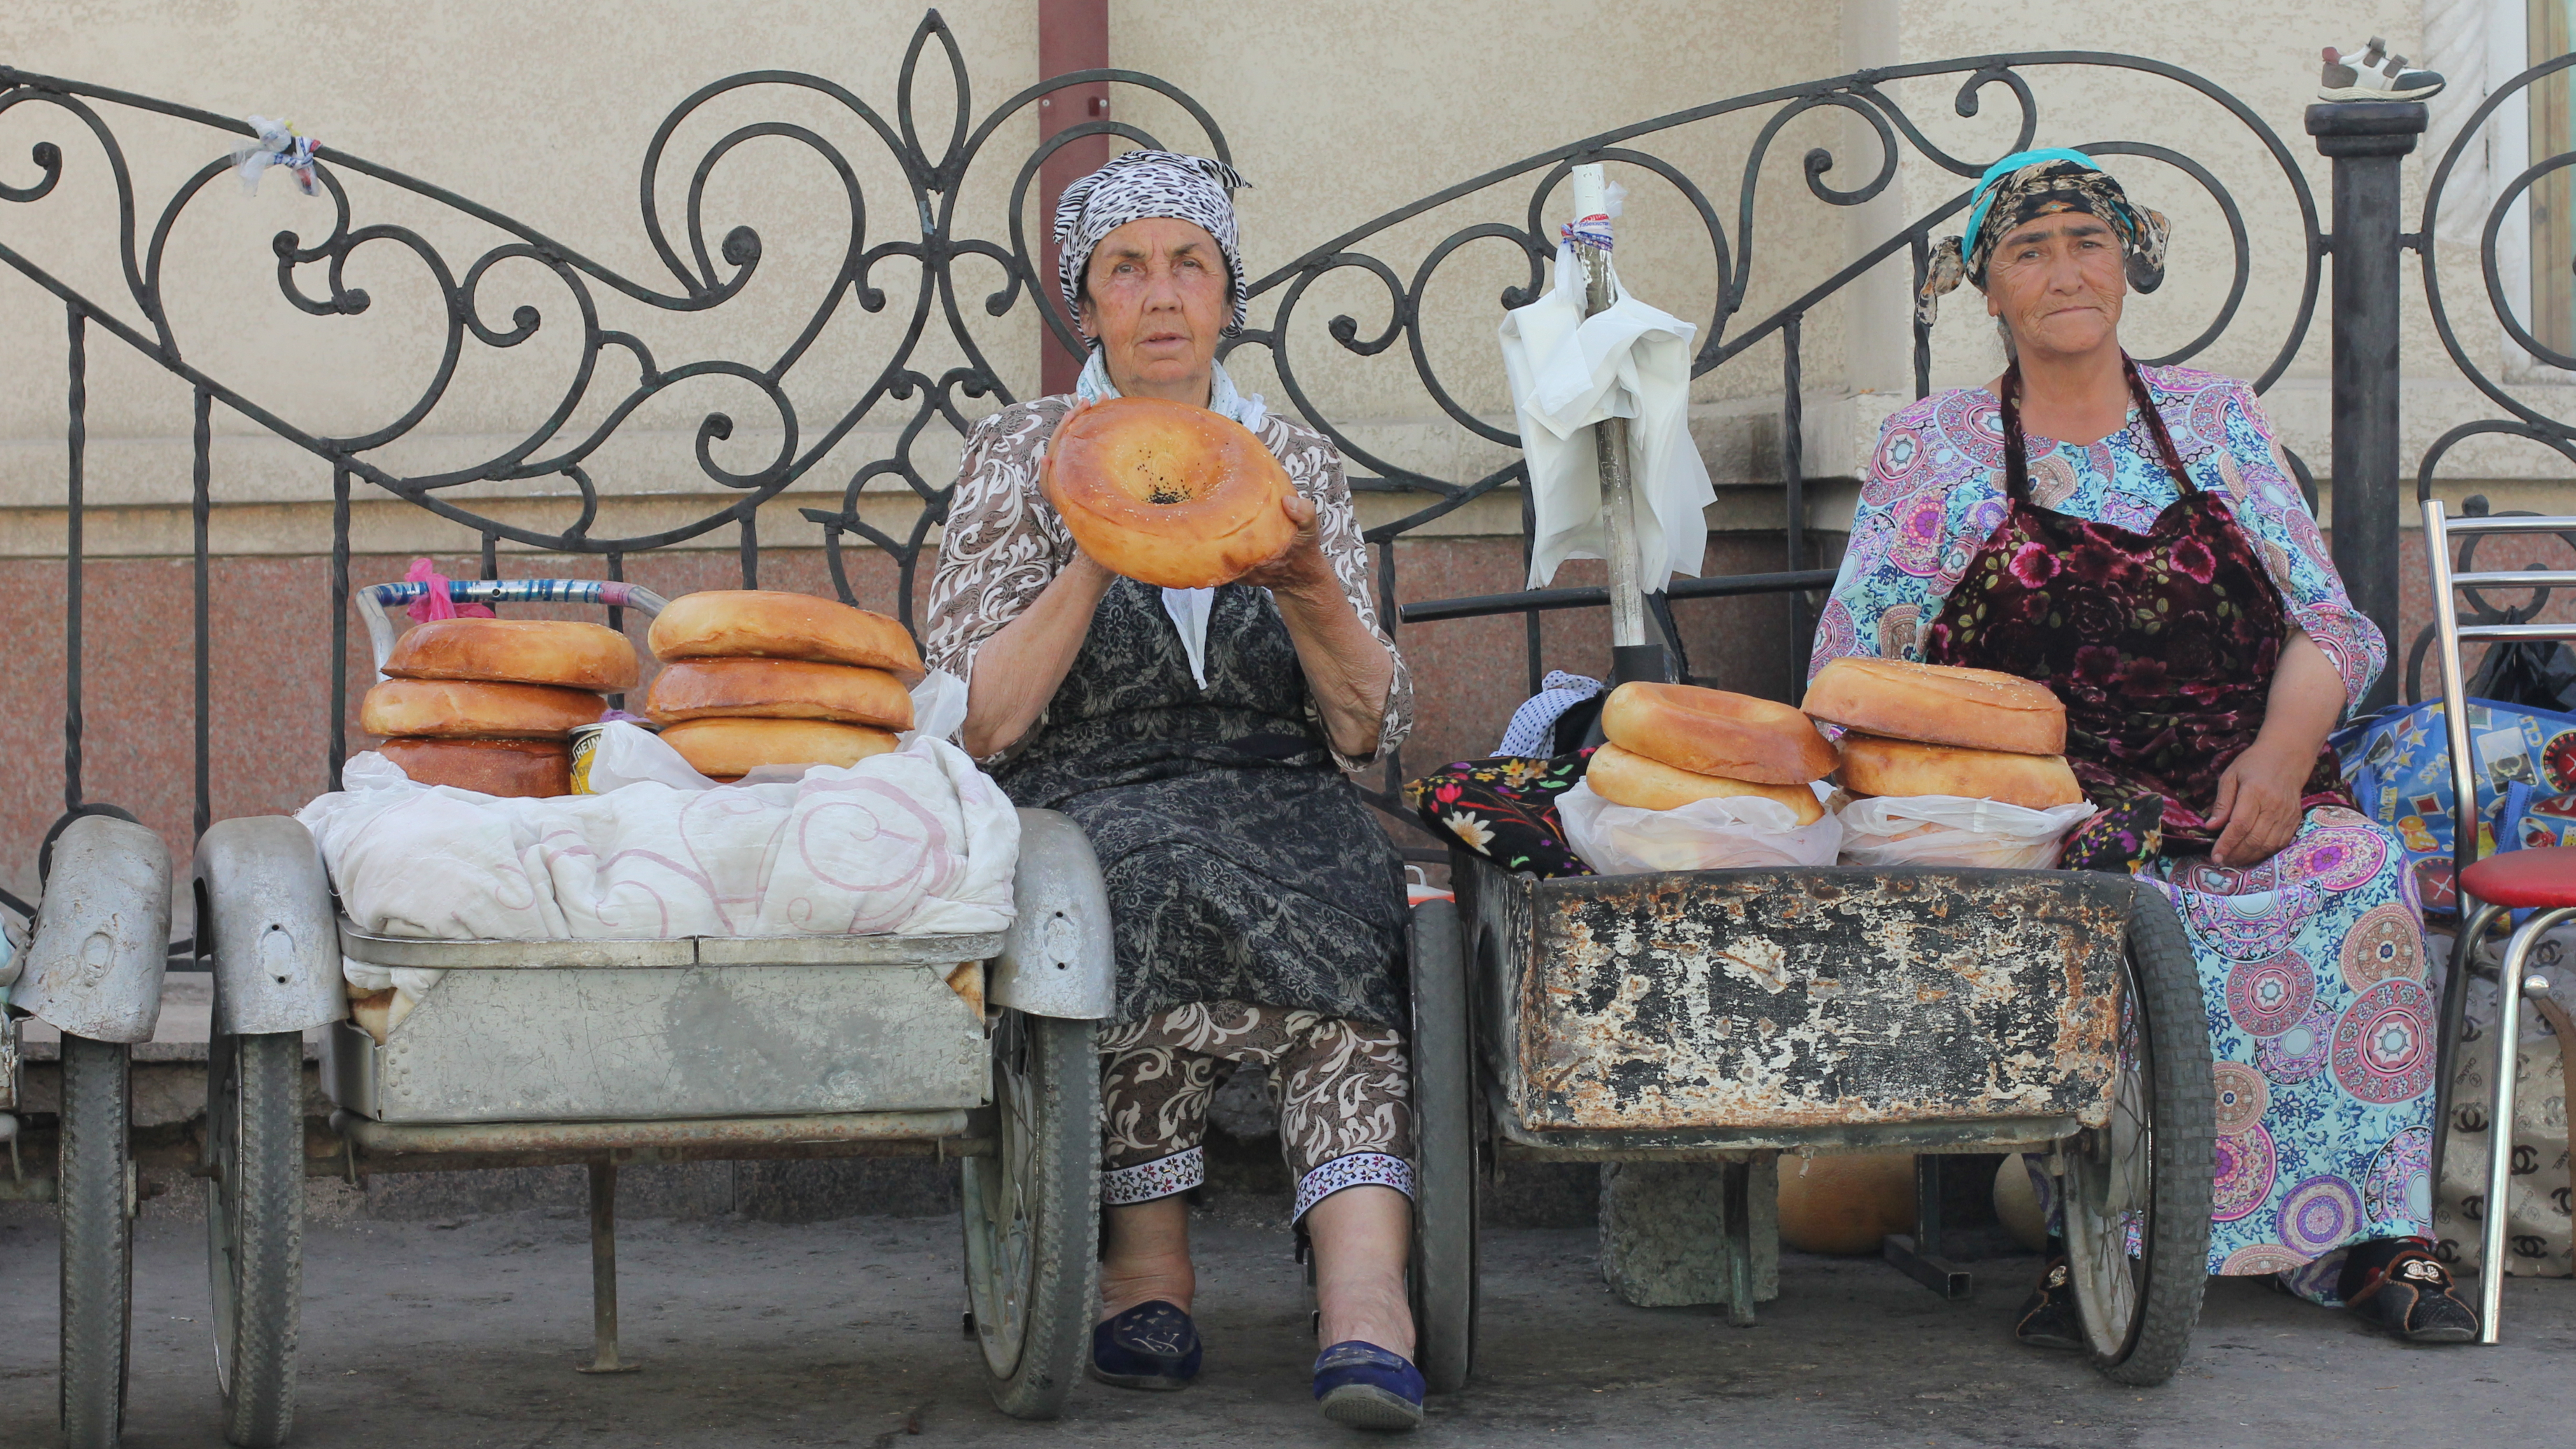 Two Uzbek women sitting on a street in Samarkand sell the fabled Samarkand non.